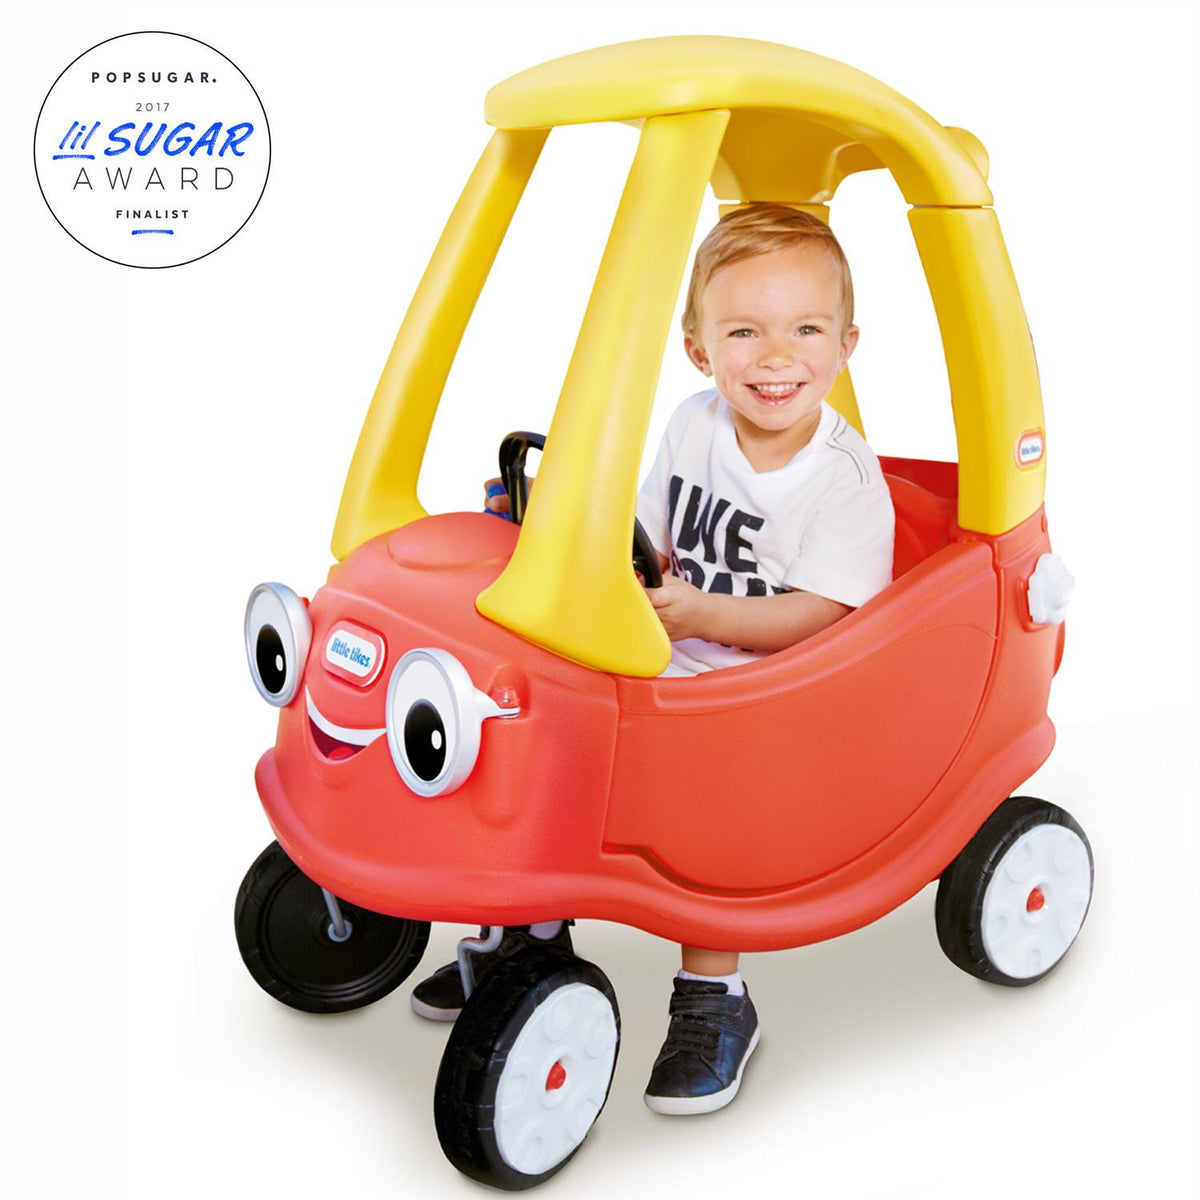 Floorboard/ Foot Rest Designed to Fit Little Tikes Cozy Coupe Push